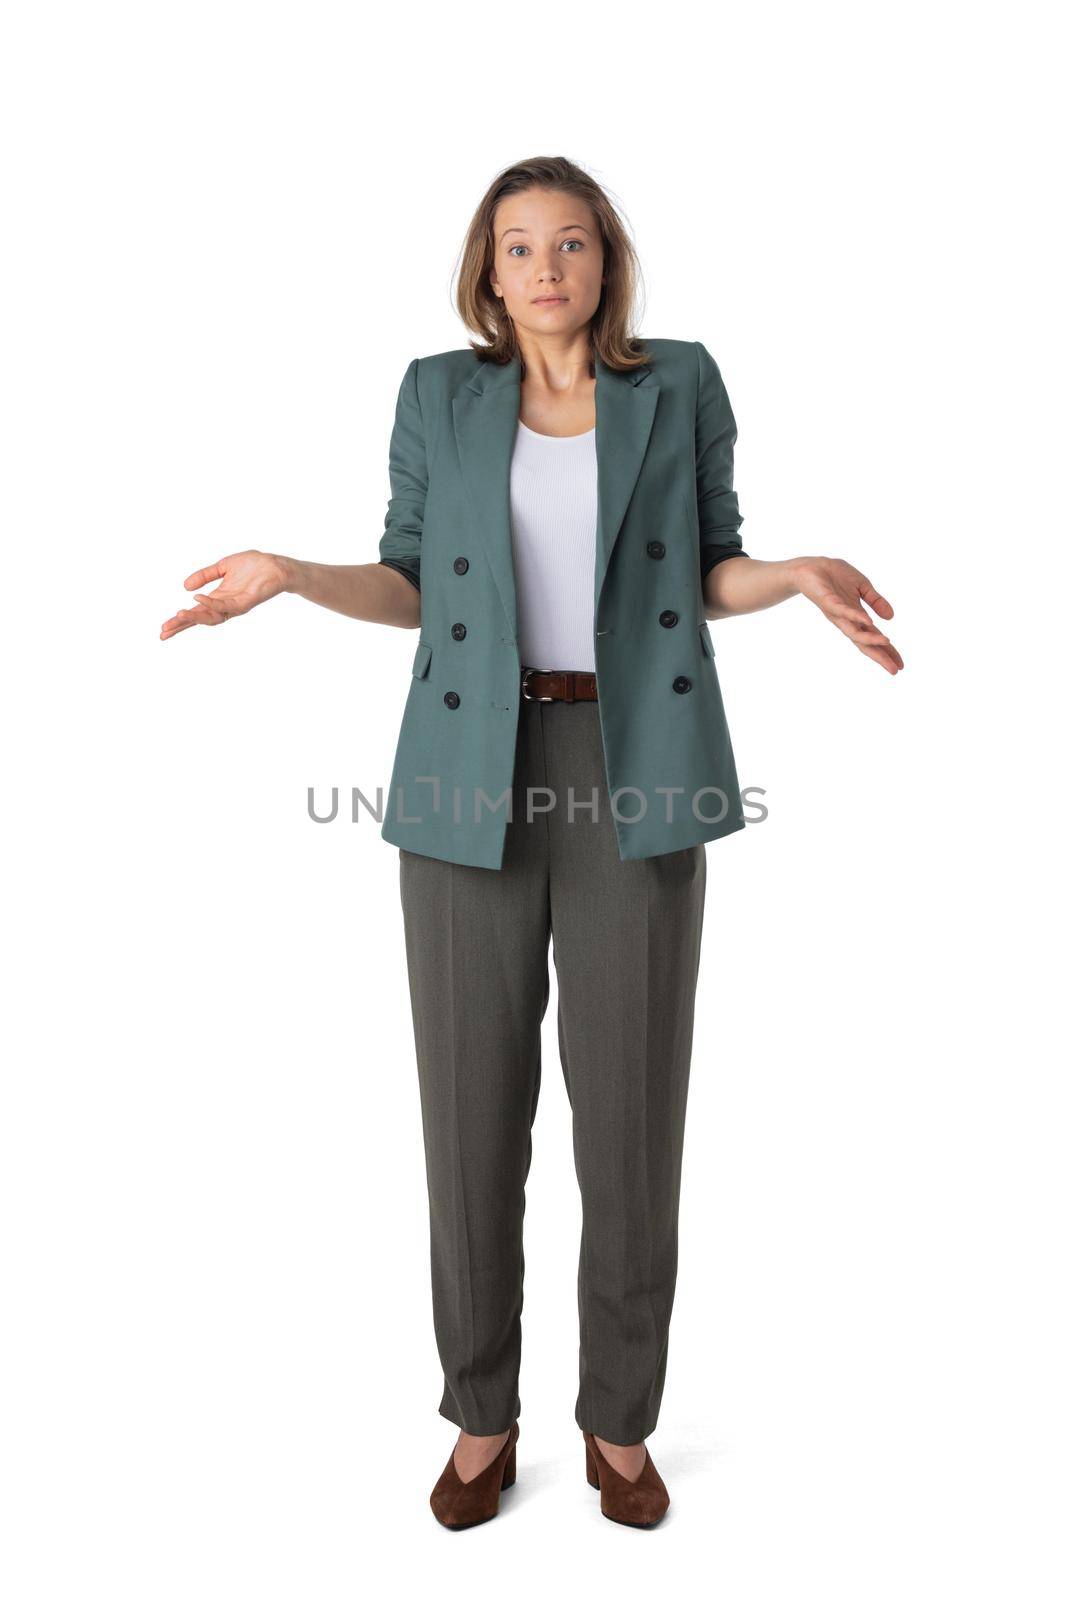 Puzzled business woman by ALotOfPeople